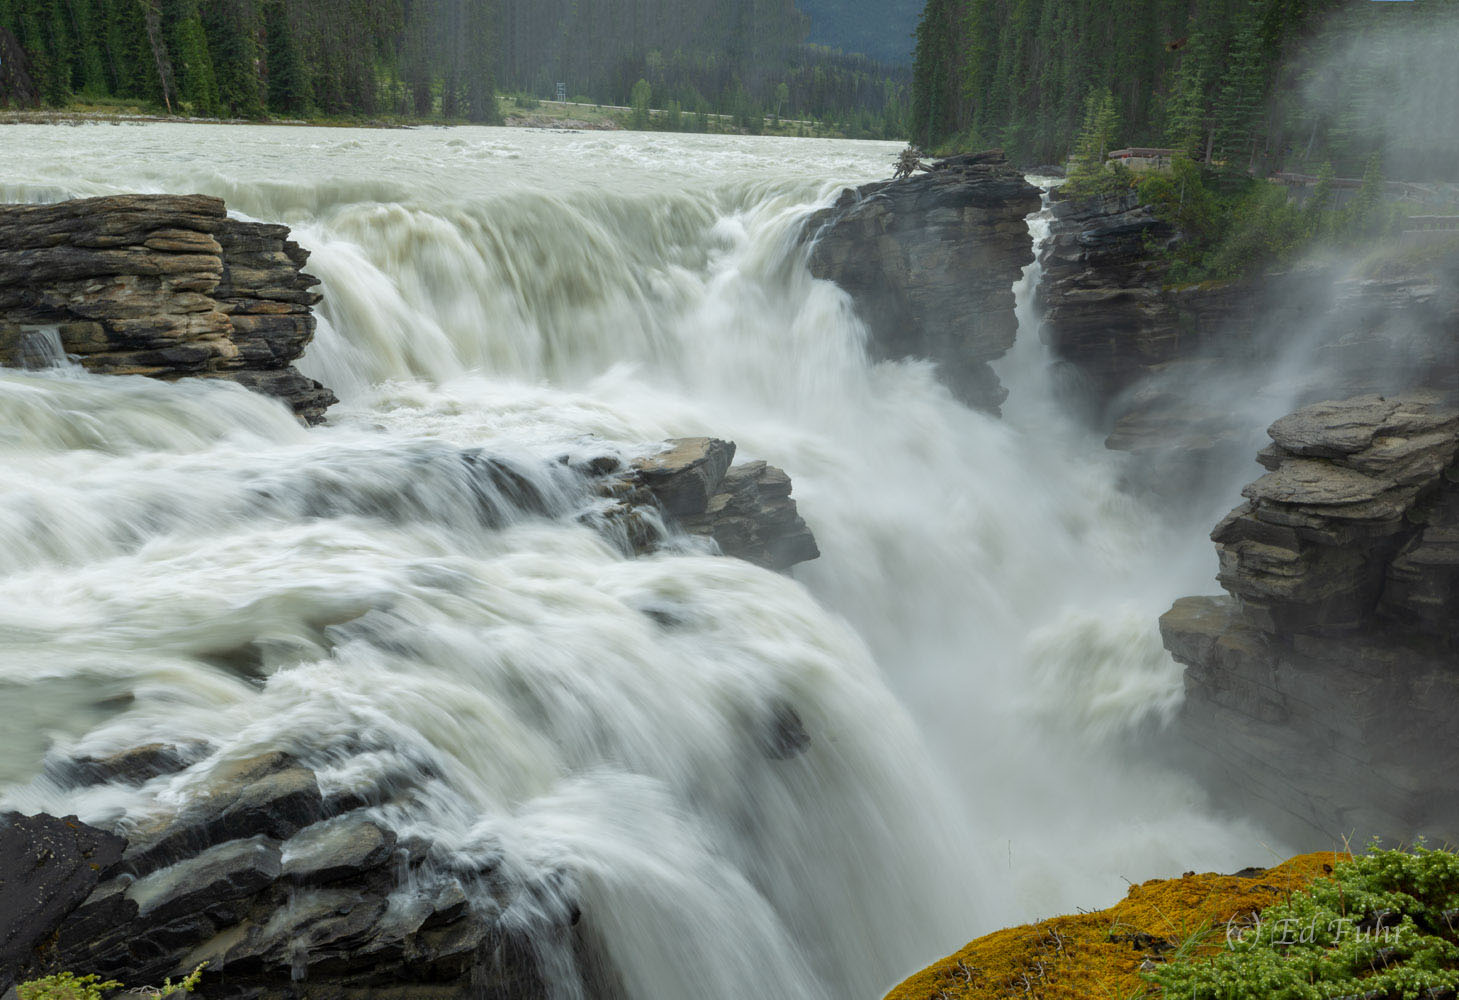 Athabasca Falls is a gorgeous and powerful waterfall, with a stunning backdrop of forests and mountains.